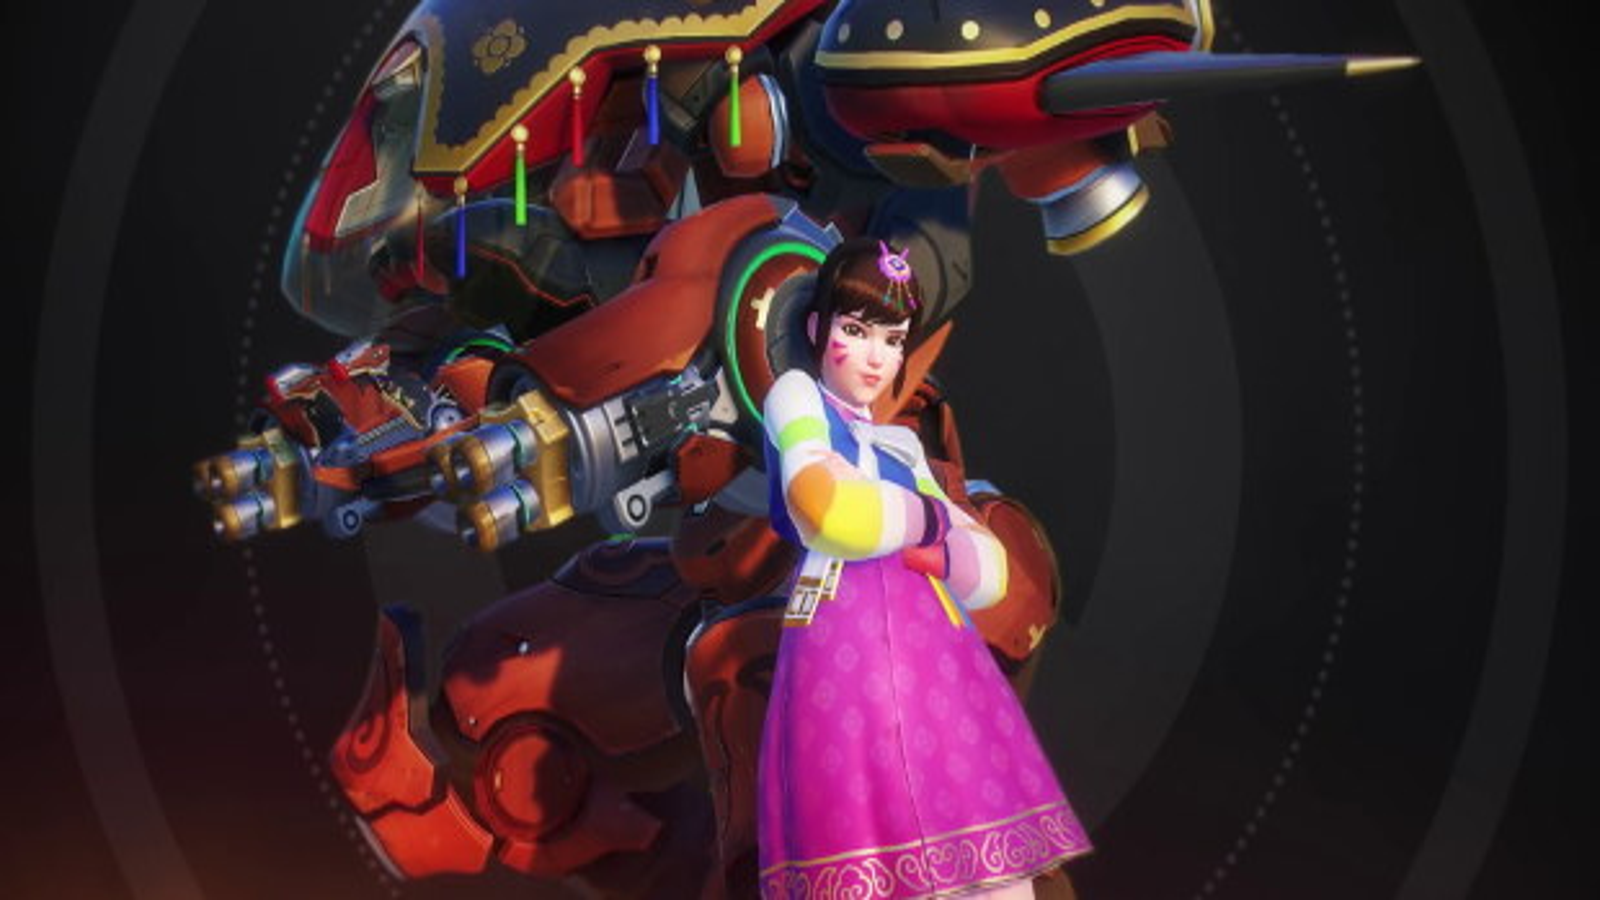 Overwatch Lunar New Year event – release date, new map, game mode